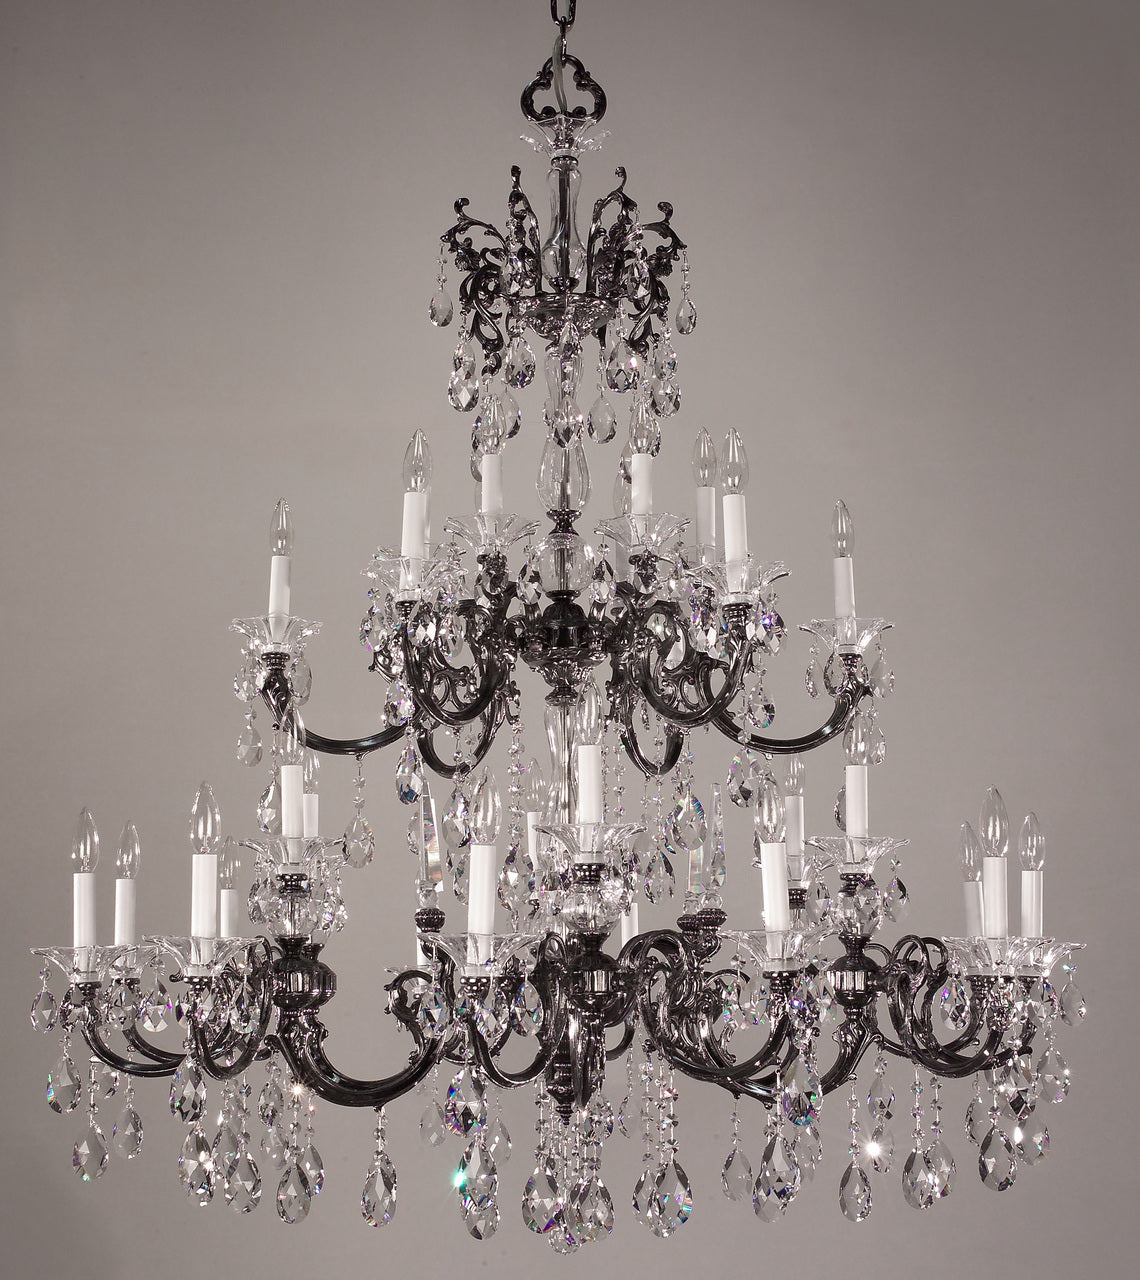 Classic Lighting 57060 MS SJT Via Lombardi Crystal Chandelier in Millennium Silver (Imported from Spain)